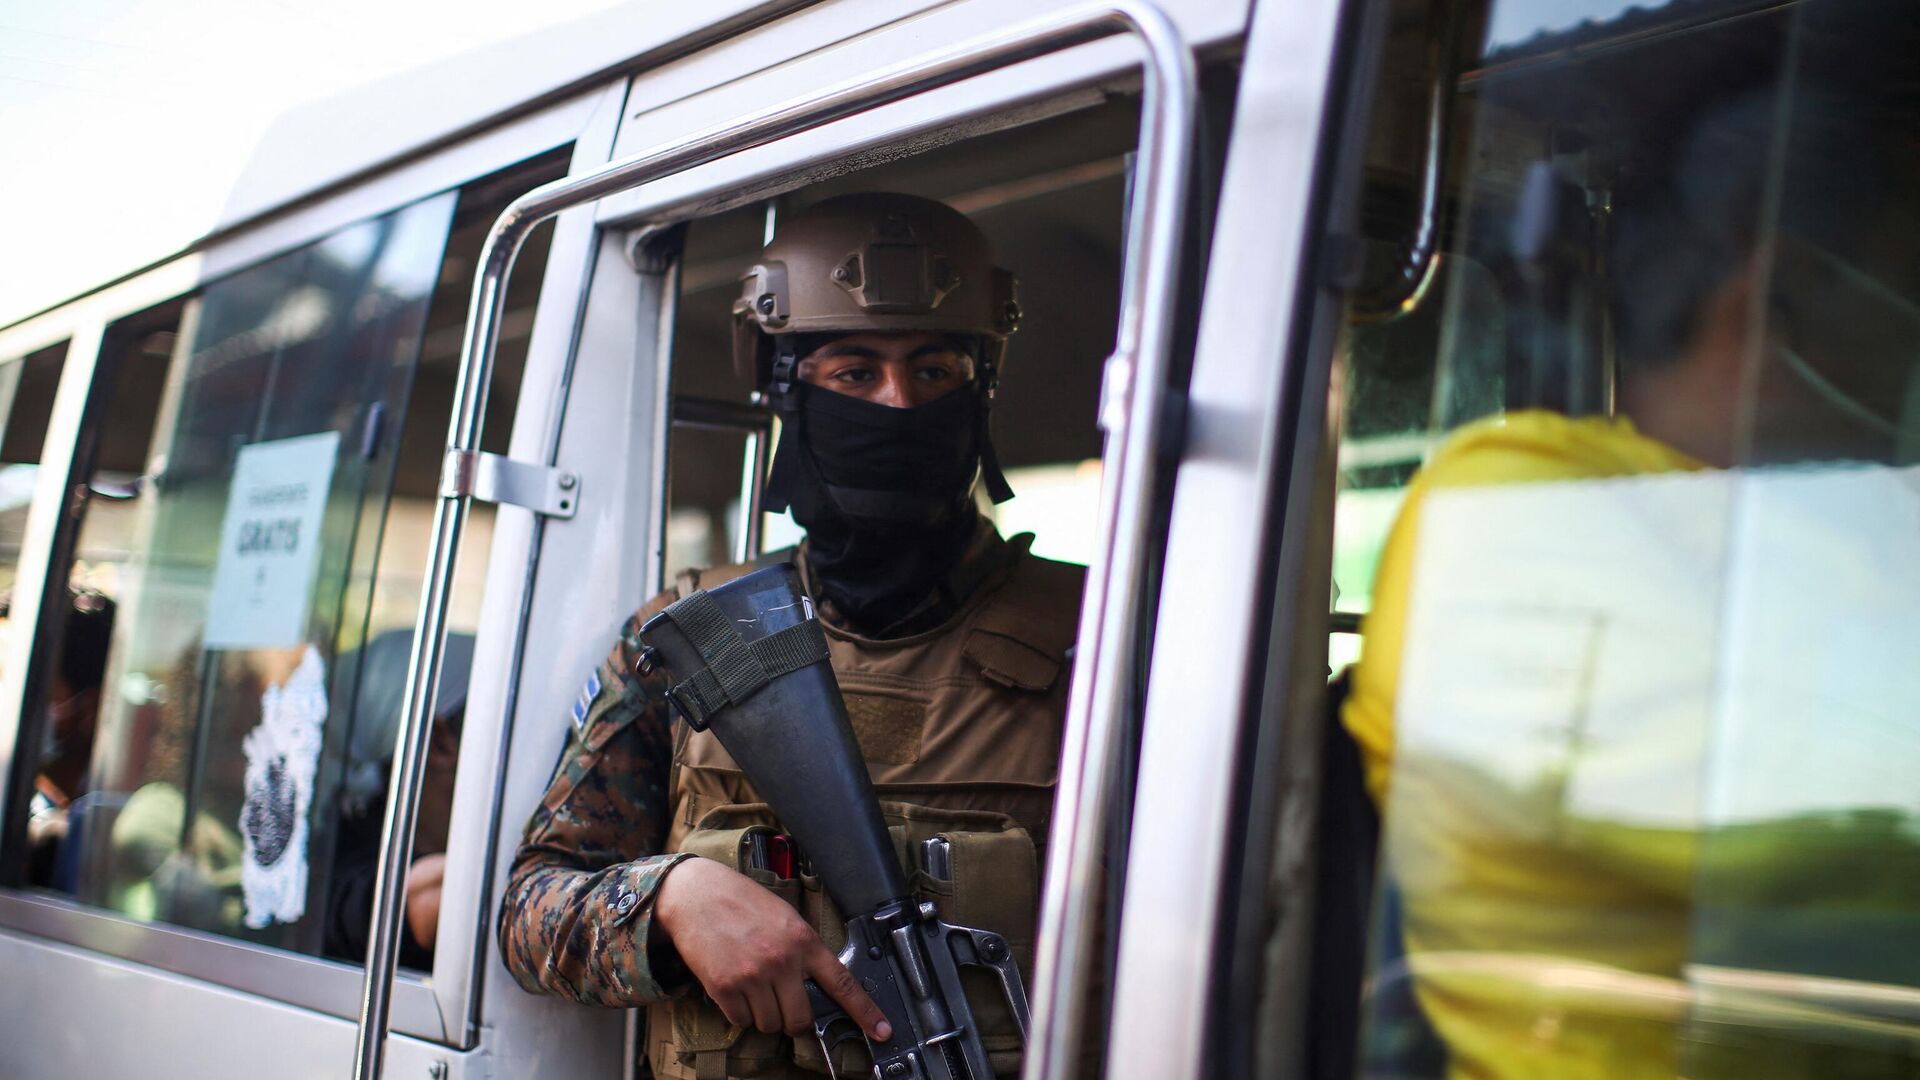 A Salvadoran soldier guards a seized transport unit in a terminal after the Salvadoran government sanctioned a bus route for violating emergency measures to alleviate the effects of high fuel prices. - Sputnik International, 1920, 27.03.2022